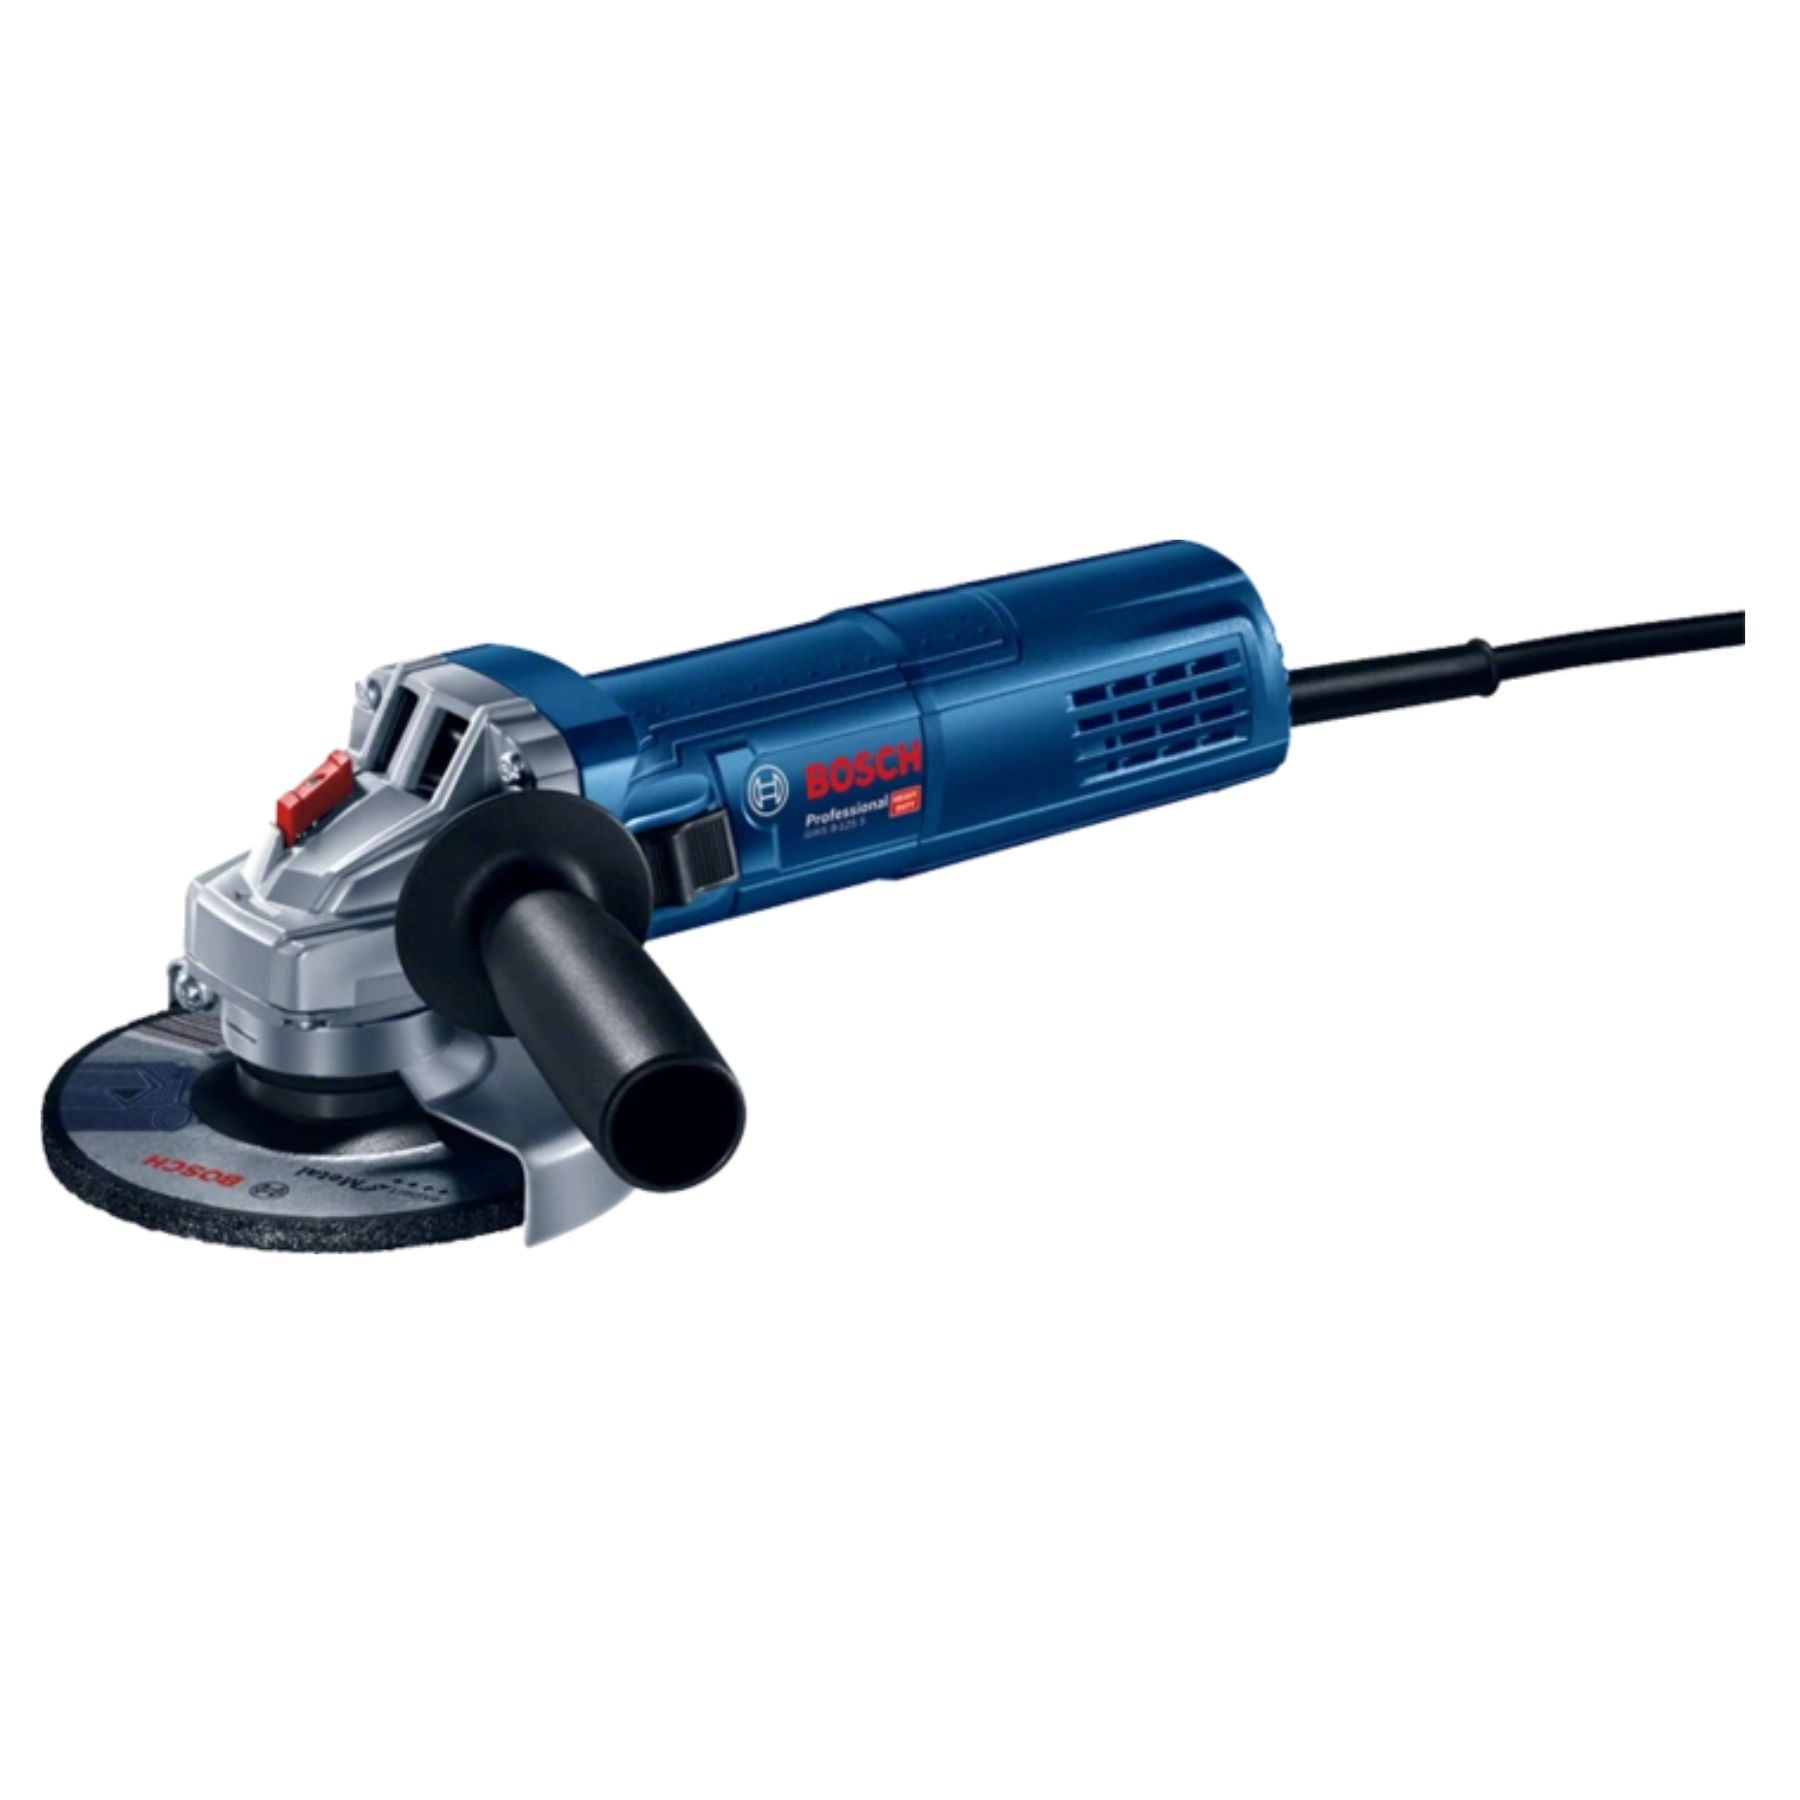 Bosch (GWS 900-125S) 5 inch Small Angle Grinder